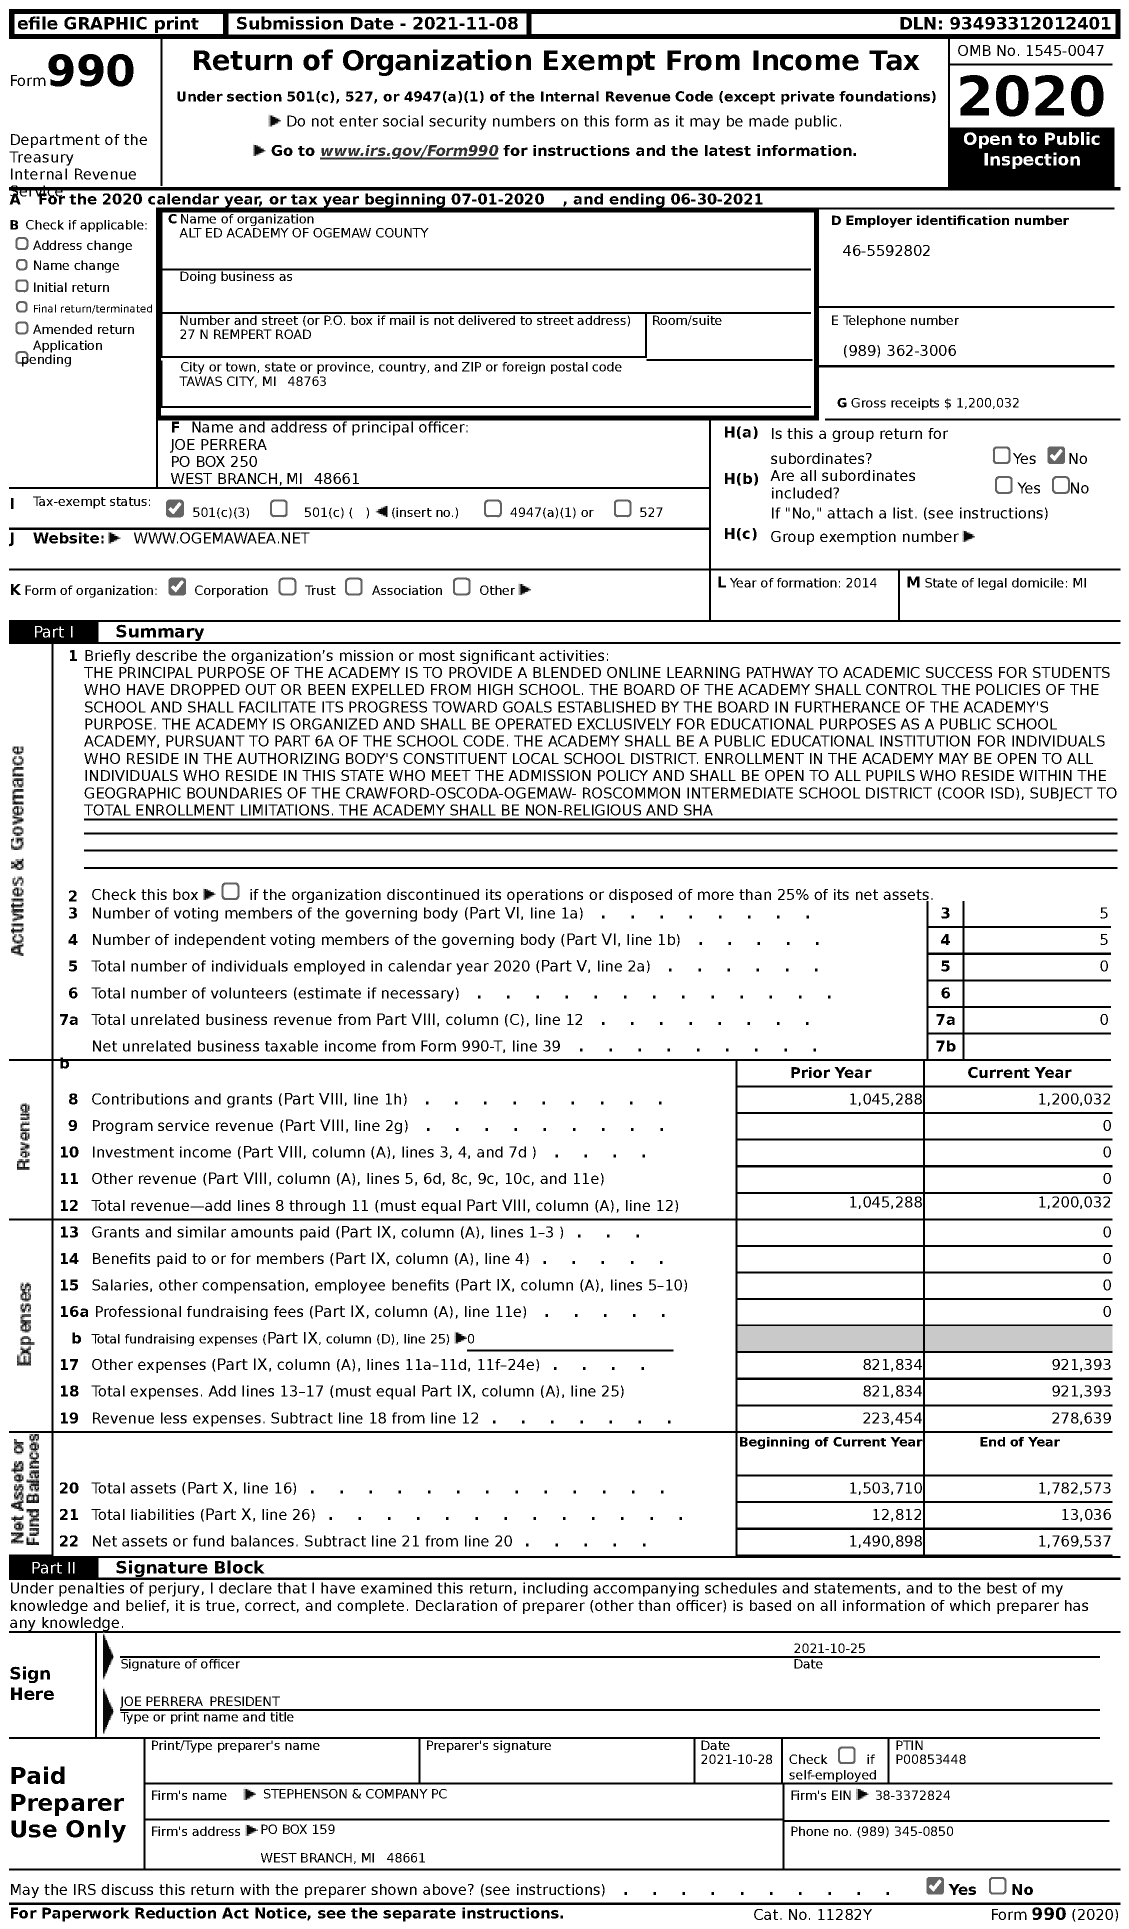 Image of first page of 2020 Form 990 for Alt Ed Academy of Ogemaw County